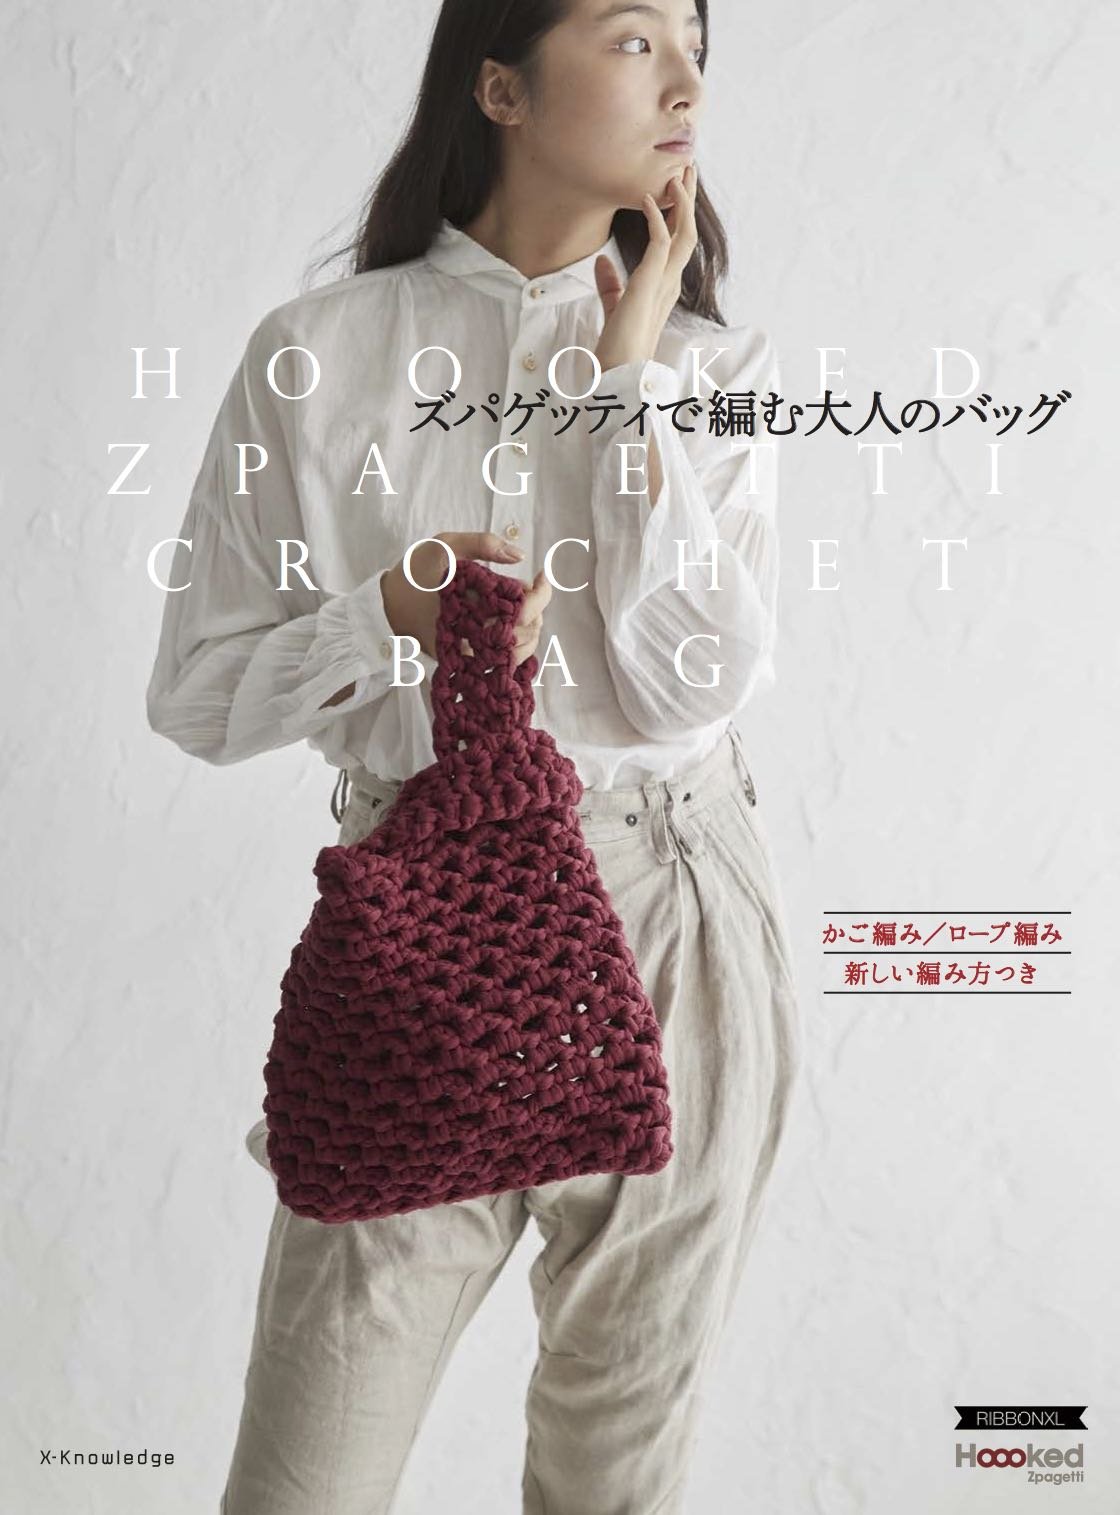 Adult bag knitting in Zupagetti